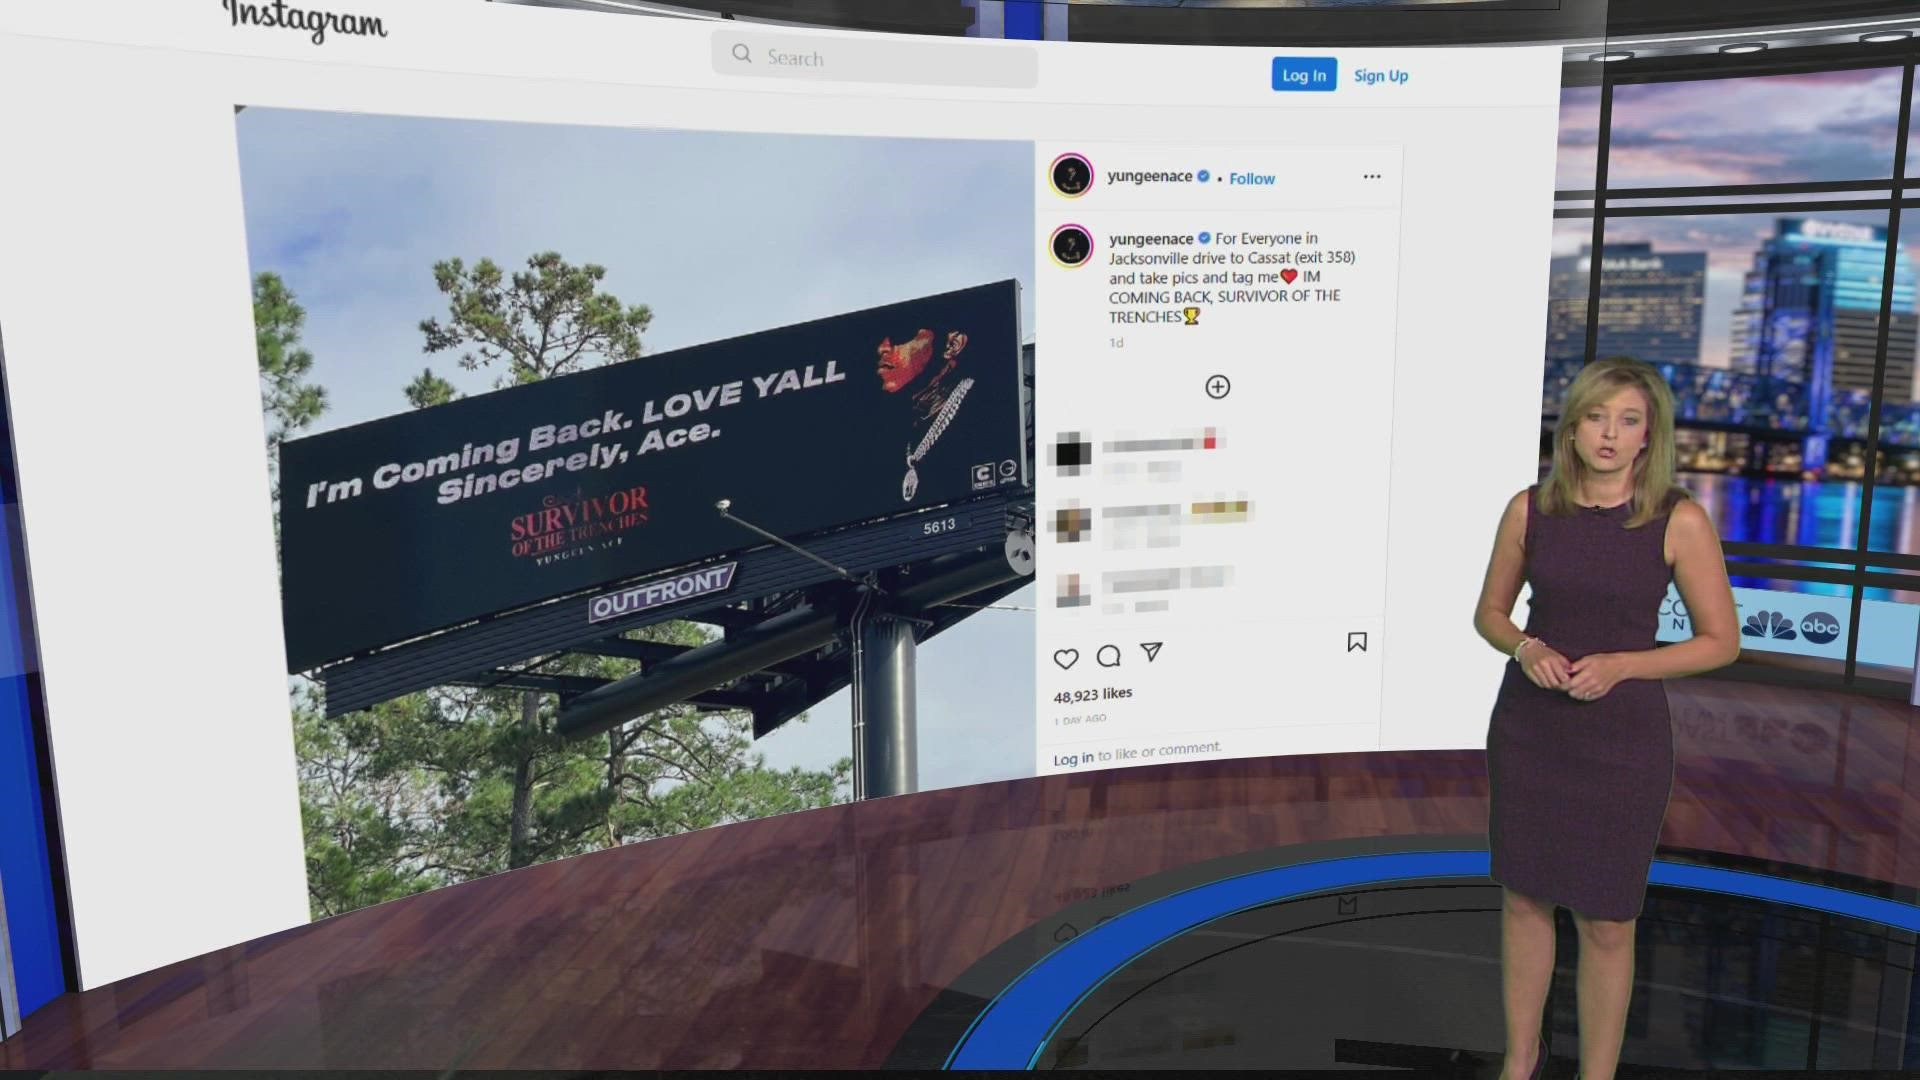 Is Jacksonville's rap scene prodigal son coming home? A billboard on the Westside suggests he might, but fans concerned for his safety say he shouldn't.